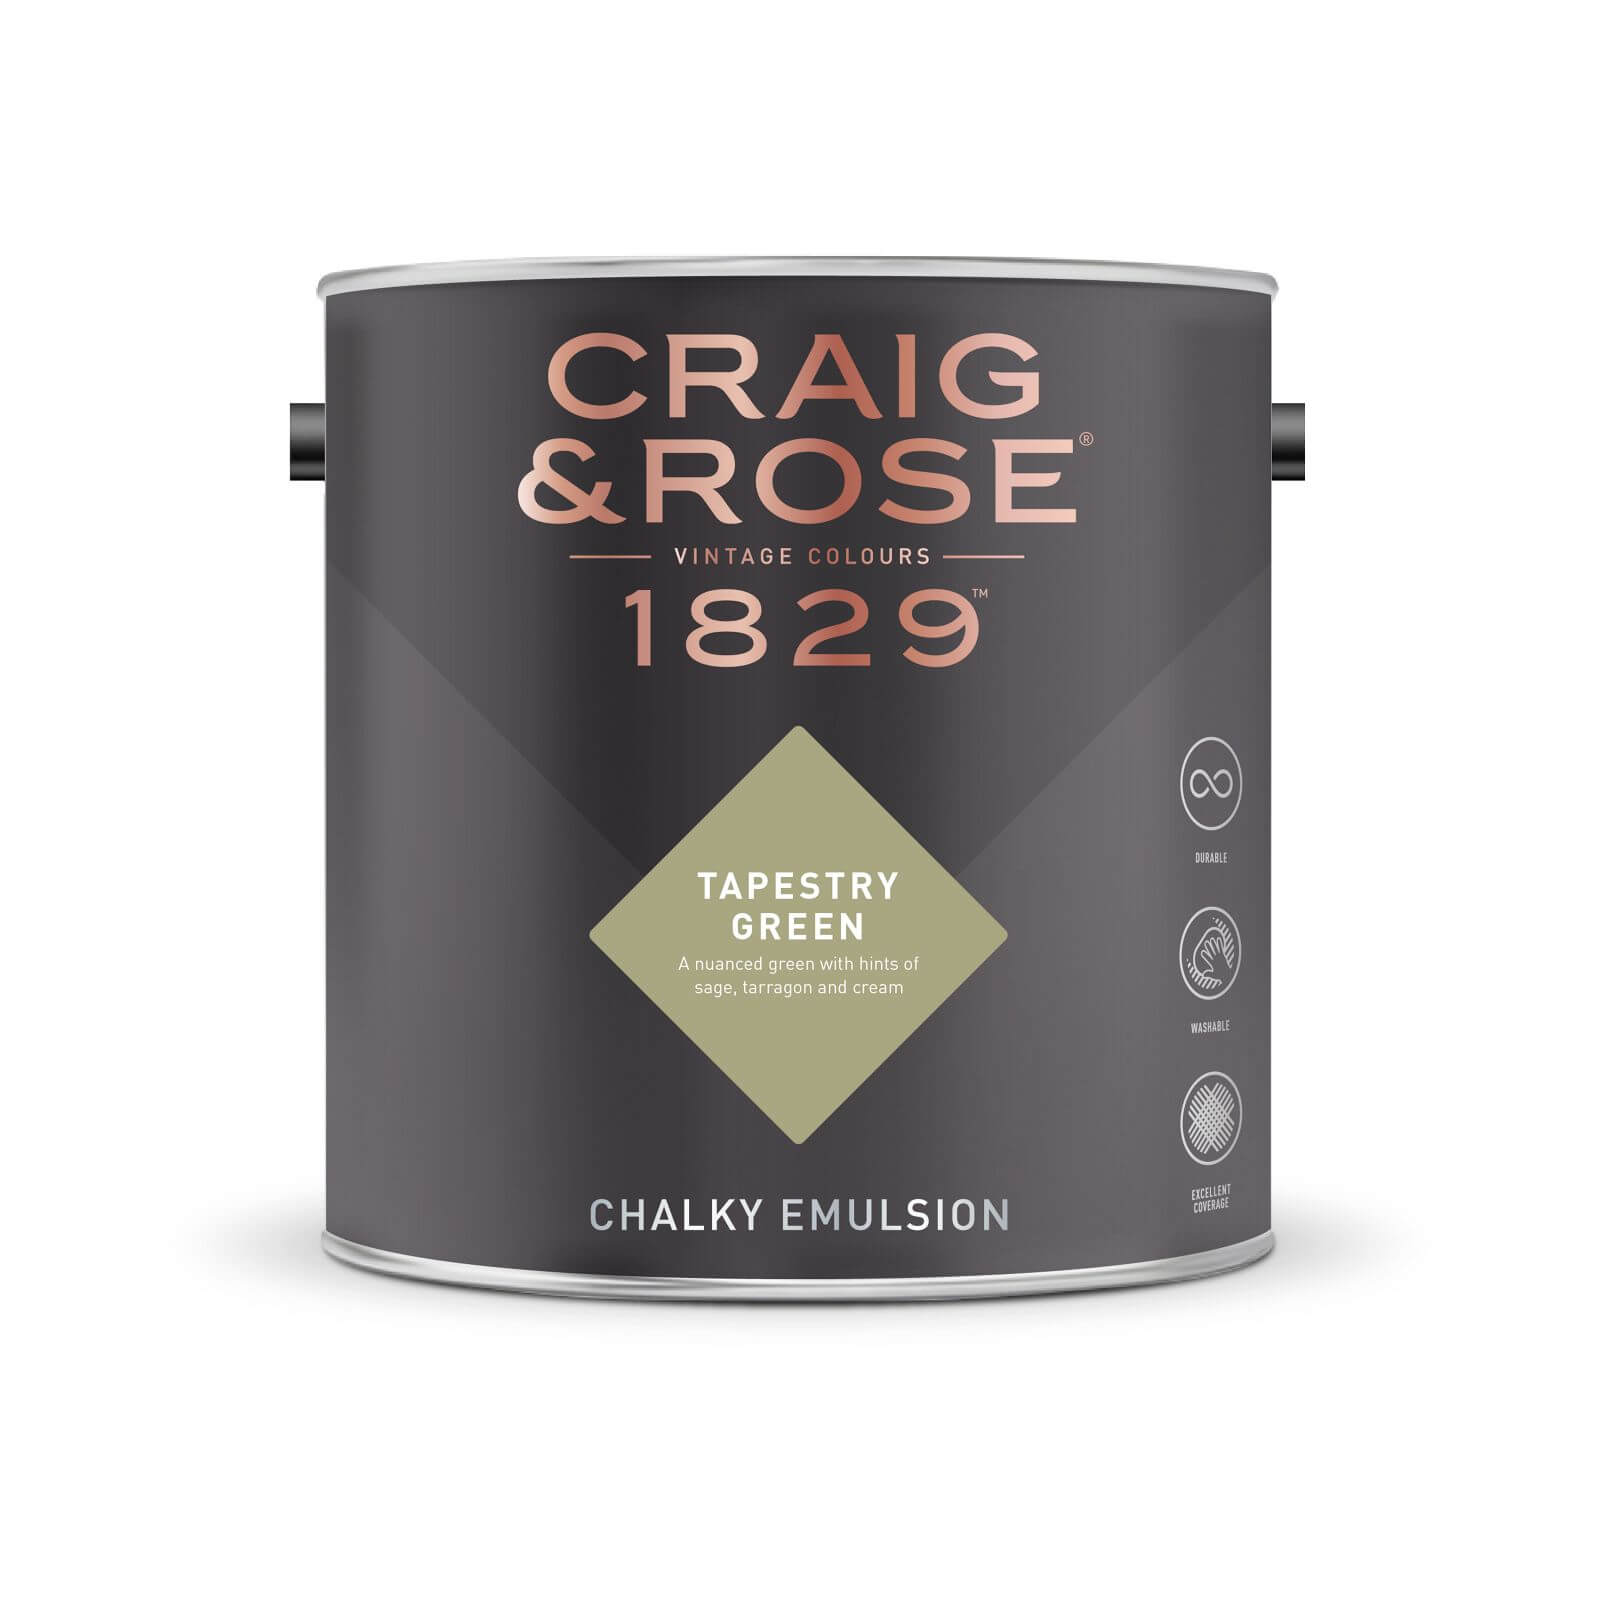 Craig & Rose 1829 Chalky Emulsion Paint Tapestry Green - Tester 50ml